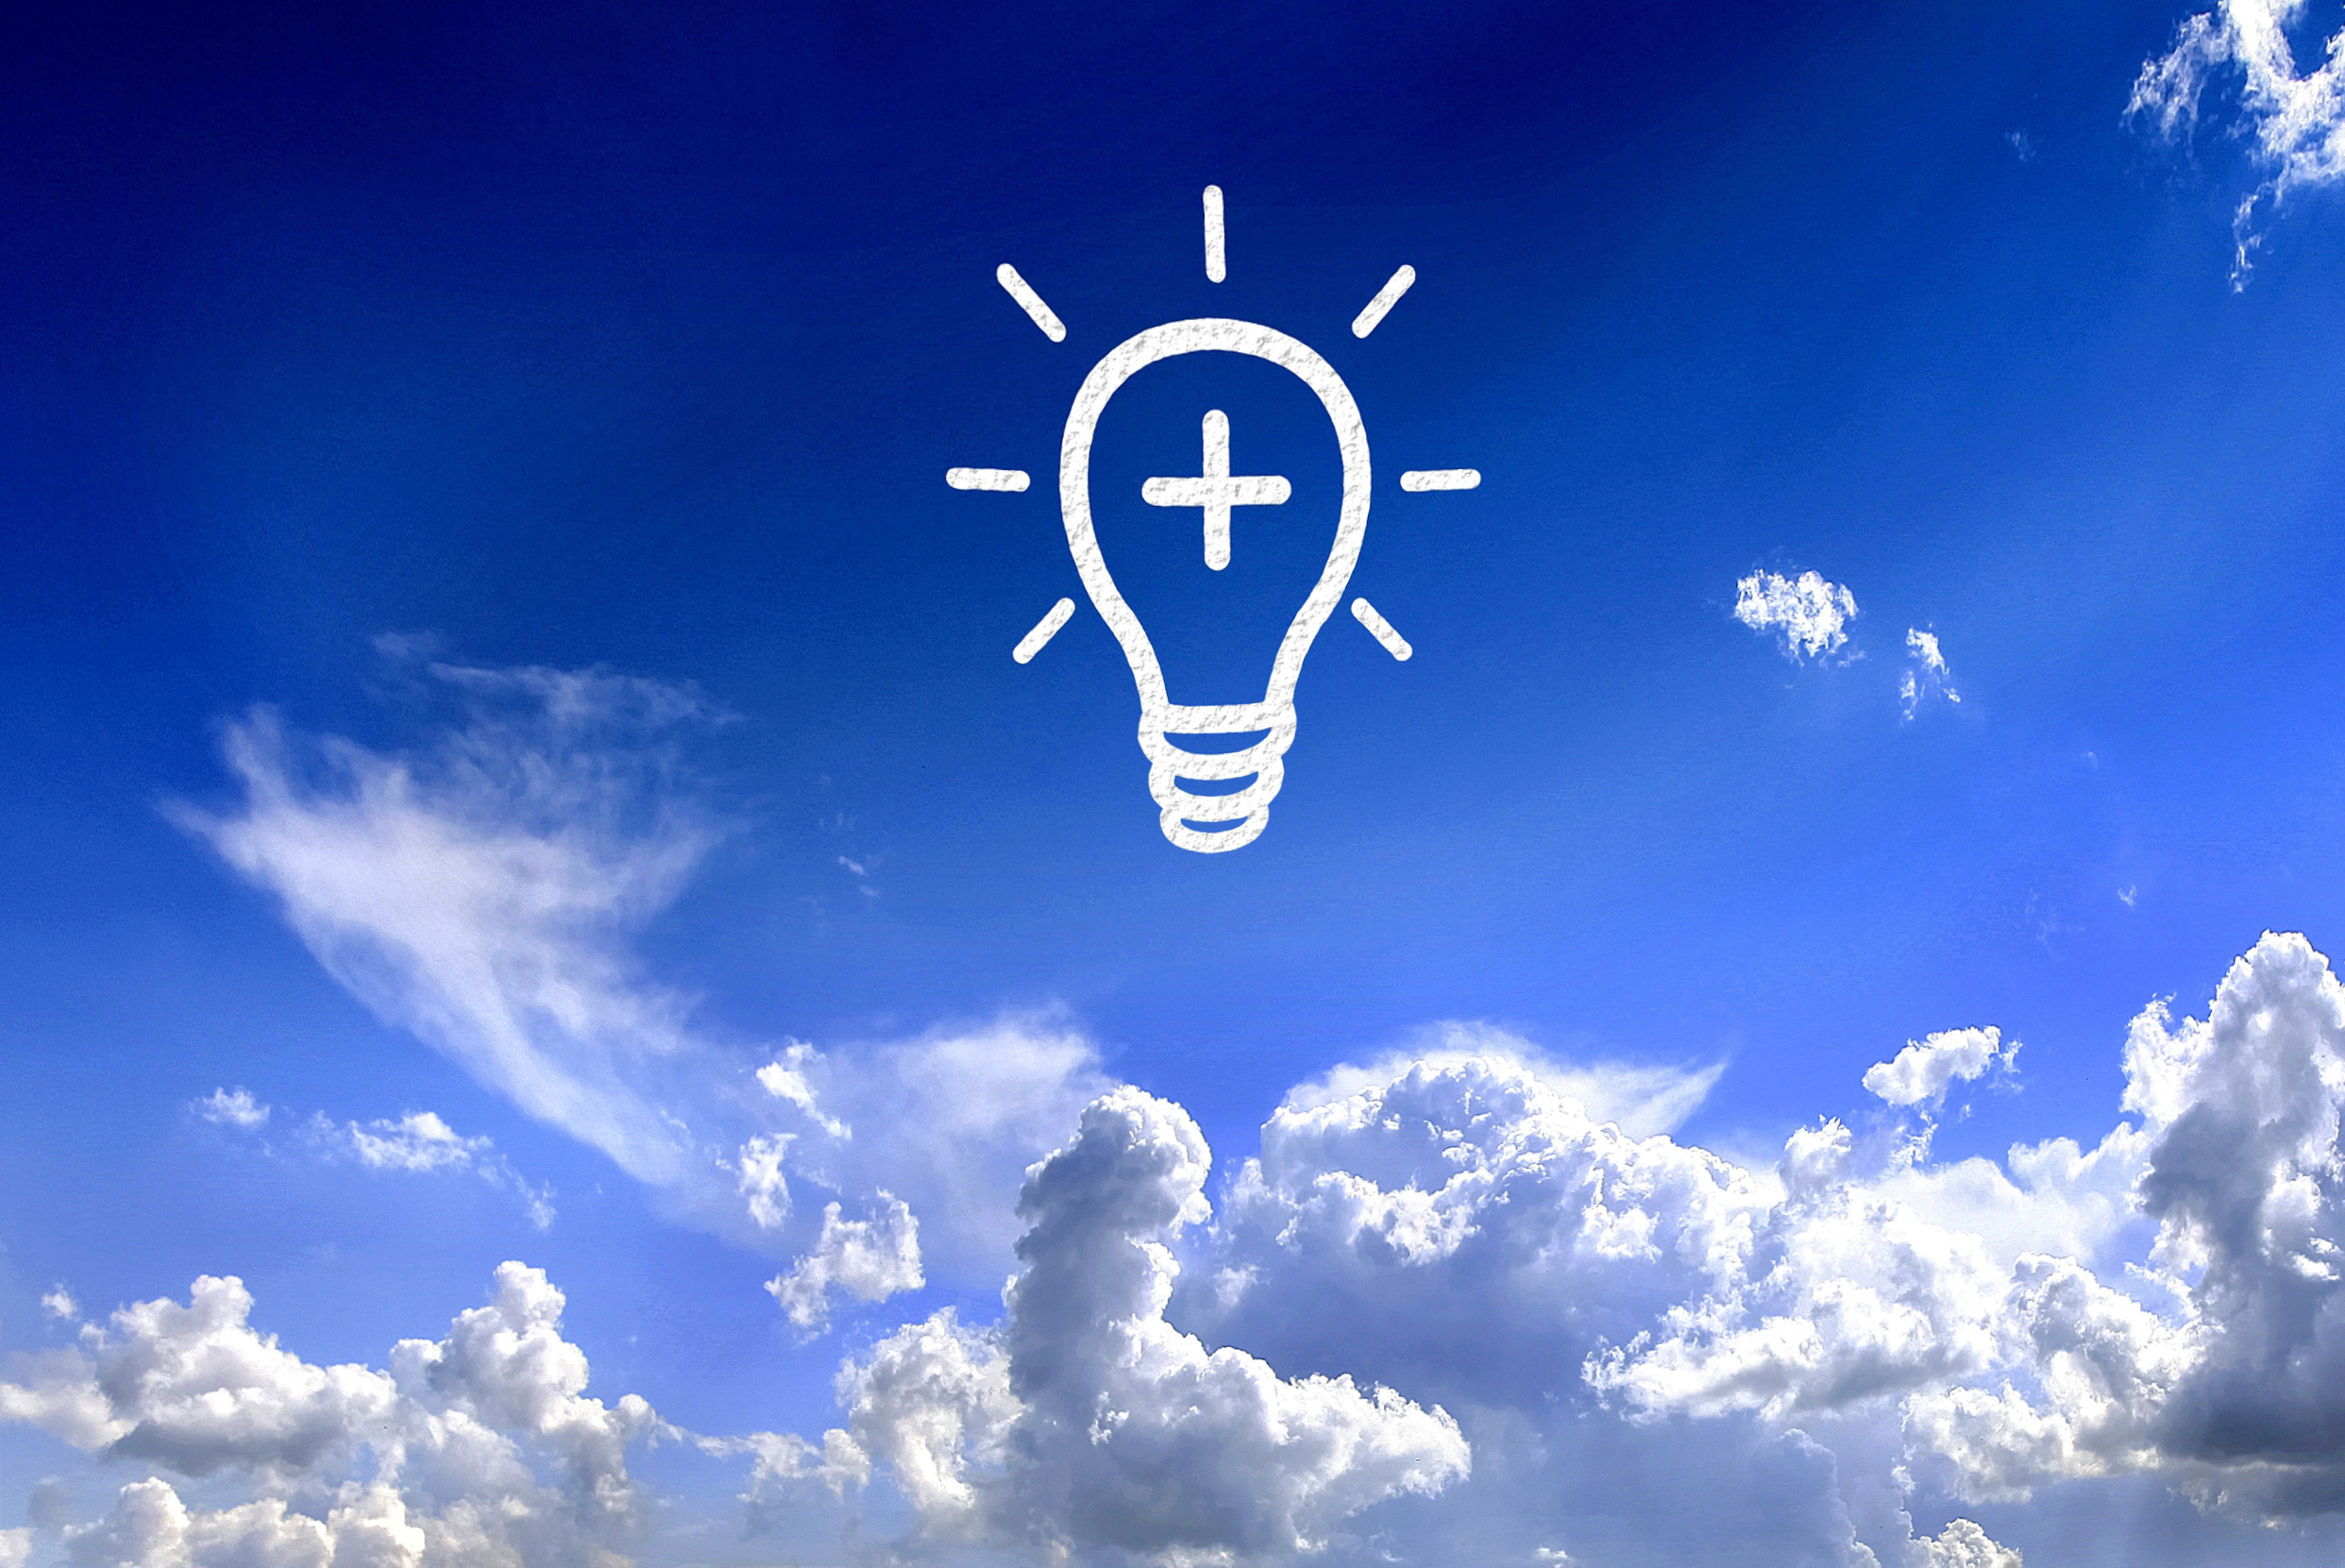 Light bulb in the sky - Brilliant ideas concept, Abstract, Pictogram, Schooling, School, HQ Photo